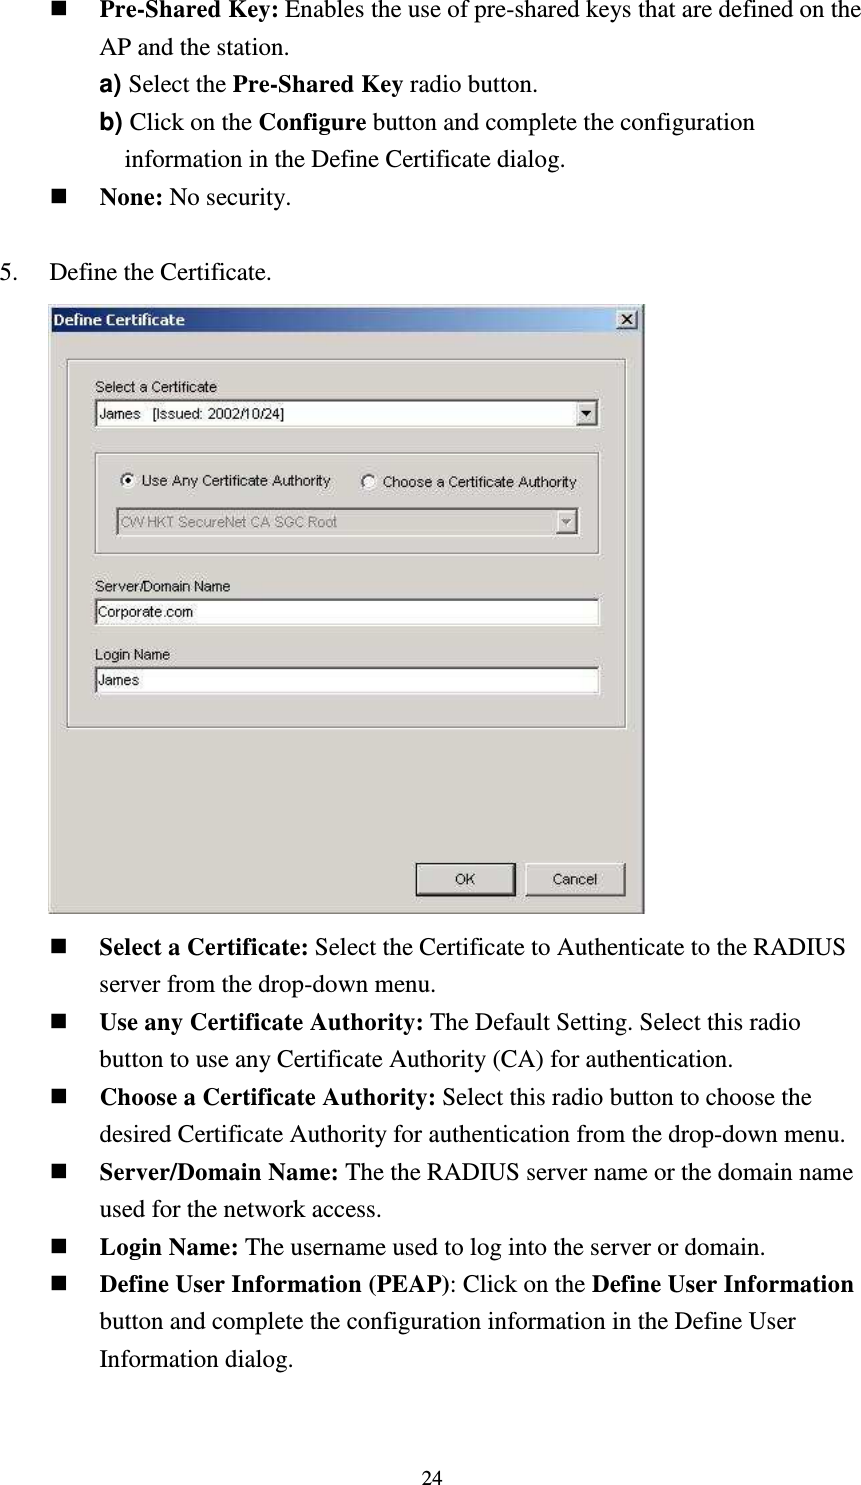   24 Pre-Shared Key: Enables the use of pre-shared keys that are defined on the AP and the station. a) Select the Pre-Shared Key radio button. b) Click on the Configure button and complete the configuration information in the Define Certificate dialog.  None: No security.  5.    Define the Certificate.        Select a Certificate: Select the Certificate to Authenticate to the RADIUS server from the drop-down menu.  Use any Certificate Authority: The Default Setting. Select this radio button to use any Certificate Authority (CA) for authentication.  Choose a Certificate Authority: Select this radio button to choose the desired Certificate Authority for authentication from the drop-down menu.  Server/Domain Name: The the RADIUS server name or the domain name used for the network access.  Login Name: The username used to log into the server or domain.  Define User Information (PEAP): Click on the Define User Information button and complete the configuration information in the Define User Information dialog.  